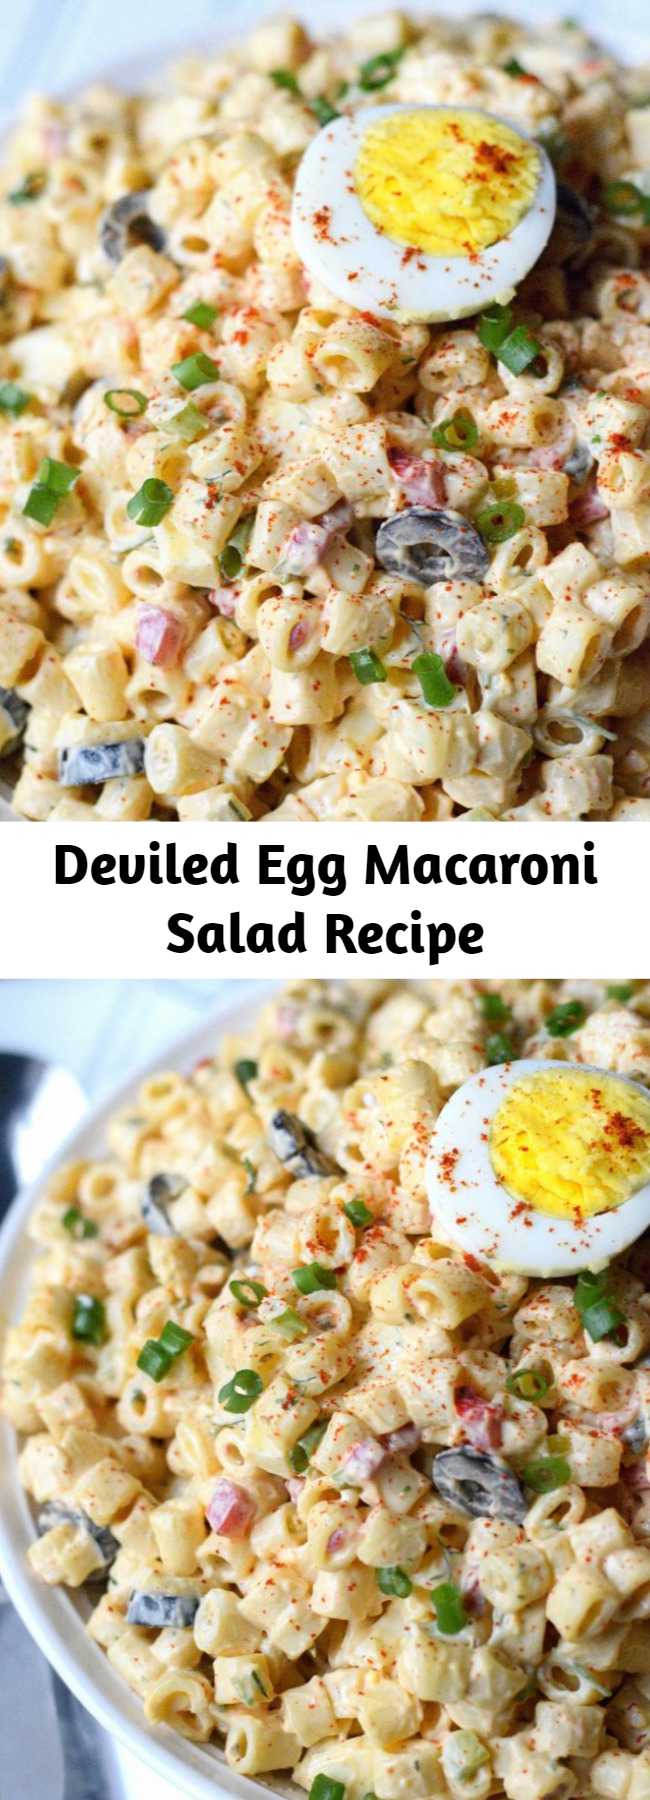 Deviled Egg Macaroni Salad Recipe - This deviled egg macaroni salad is creamy and loaded with hard boiled eggs. Quick and delicious and the perfect addition to any meal. #macaronisalad #pastasalad #summerfood #potluckside